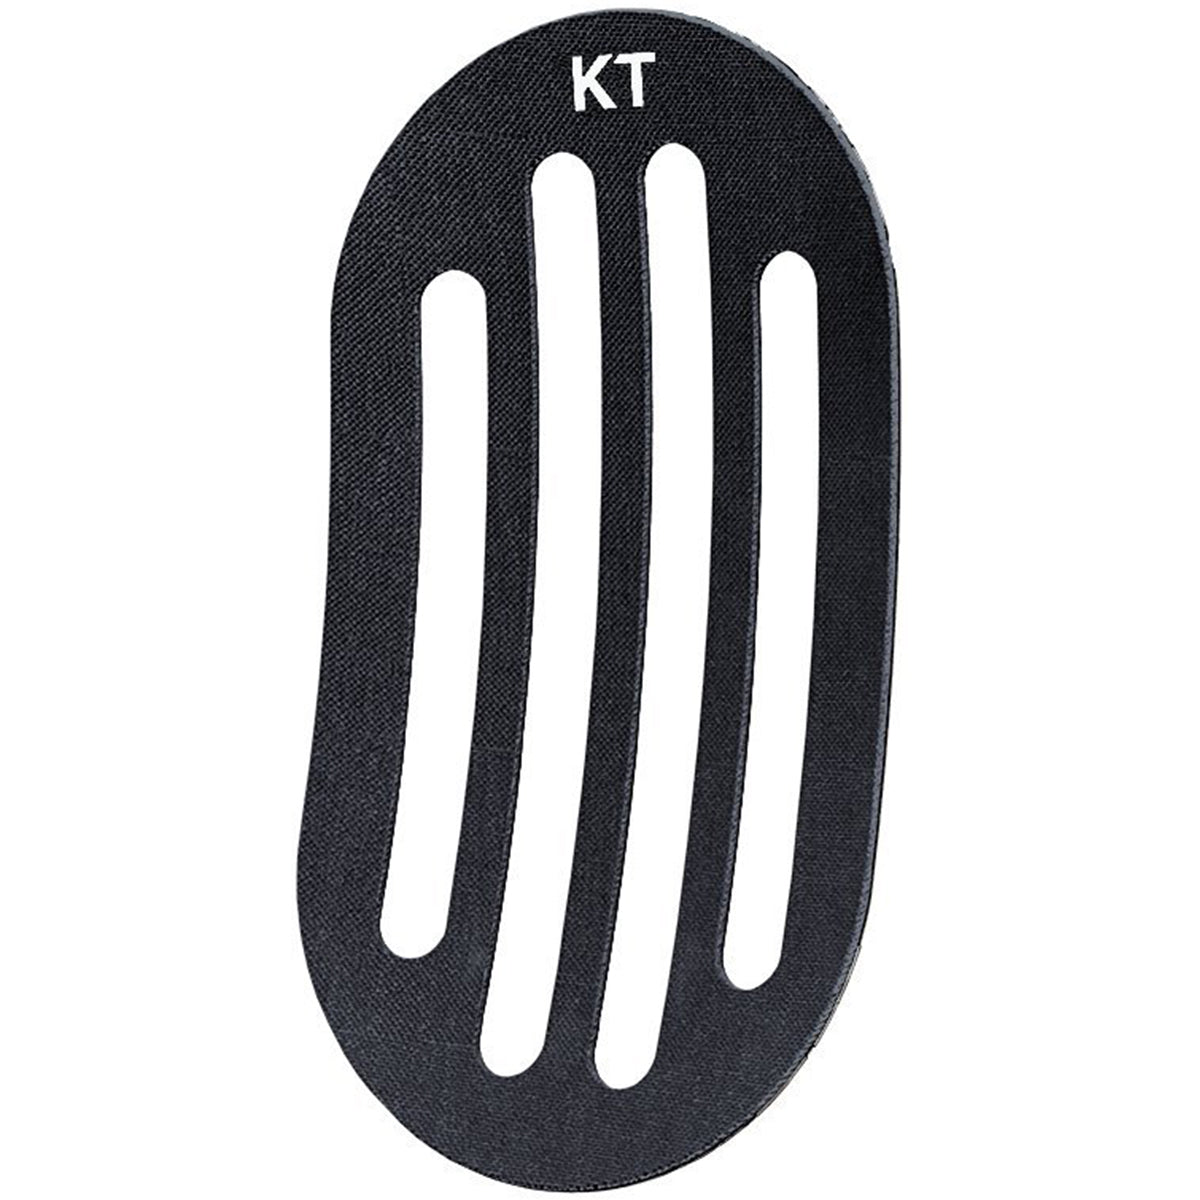 KT Tape Recovery+ Swelling and Inflammation Recovery Patches - Black KT Tape